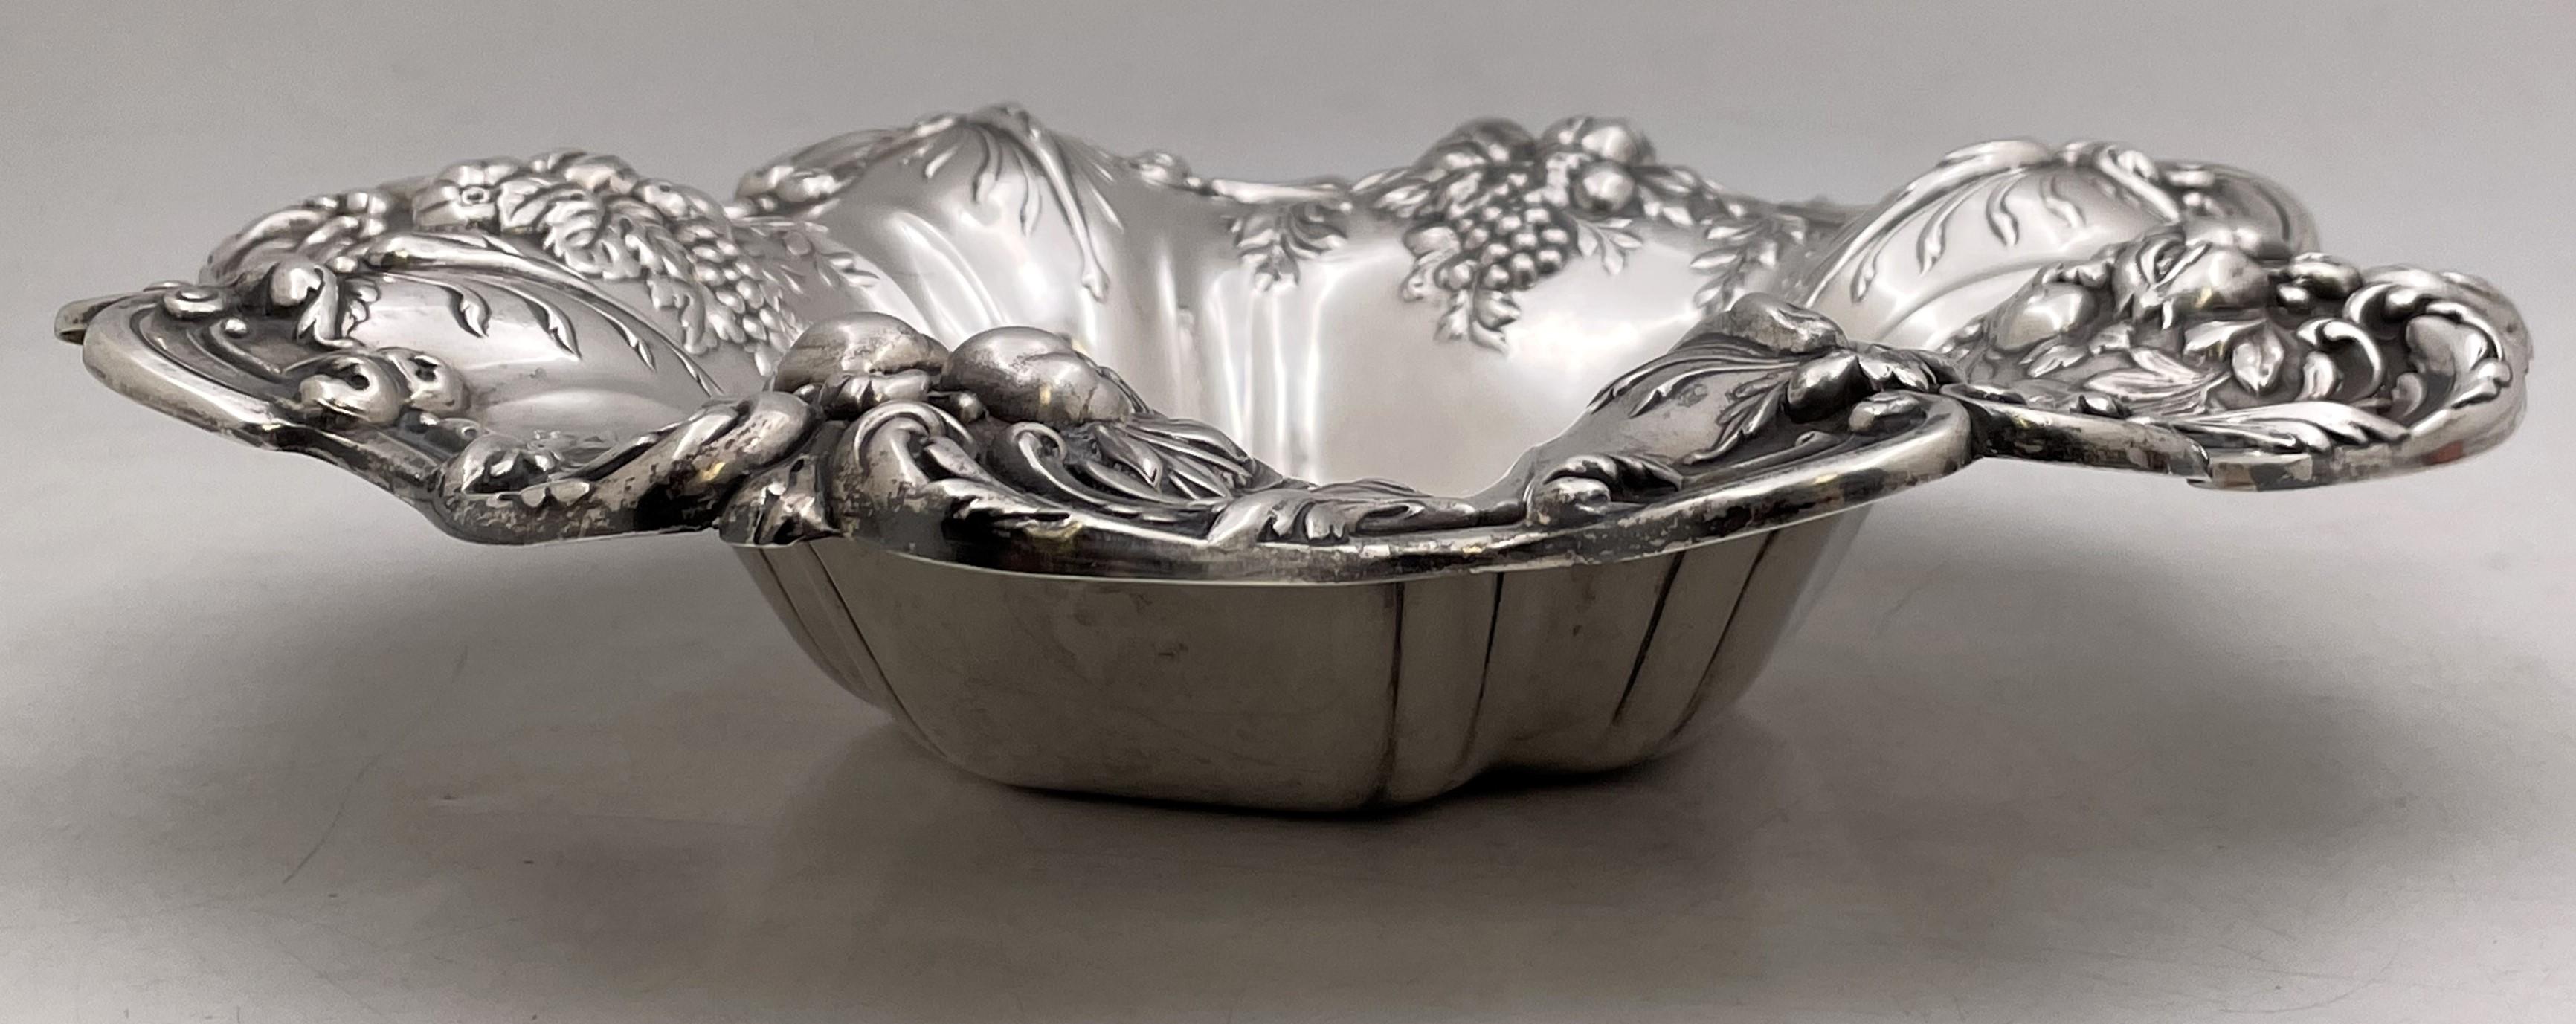 Reed & Barton Sterling Silver Francis I Bowl X569 in Art Nouveau Style For Sale 1